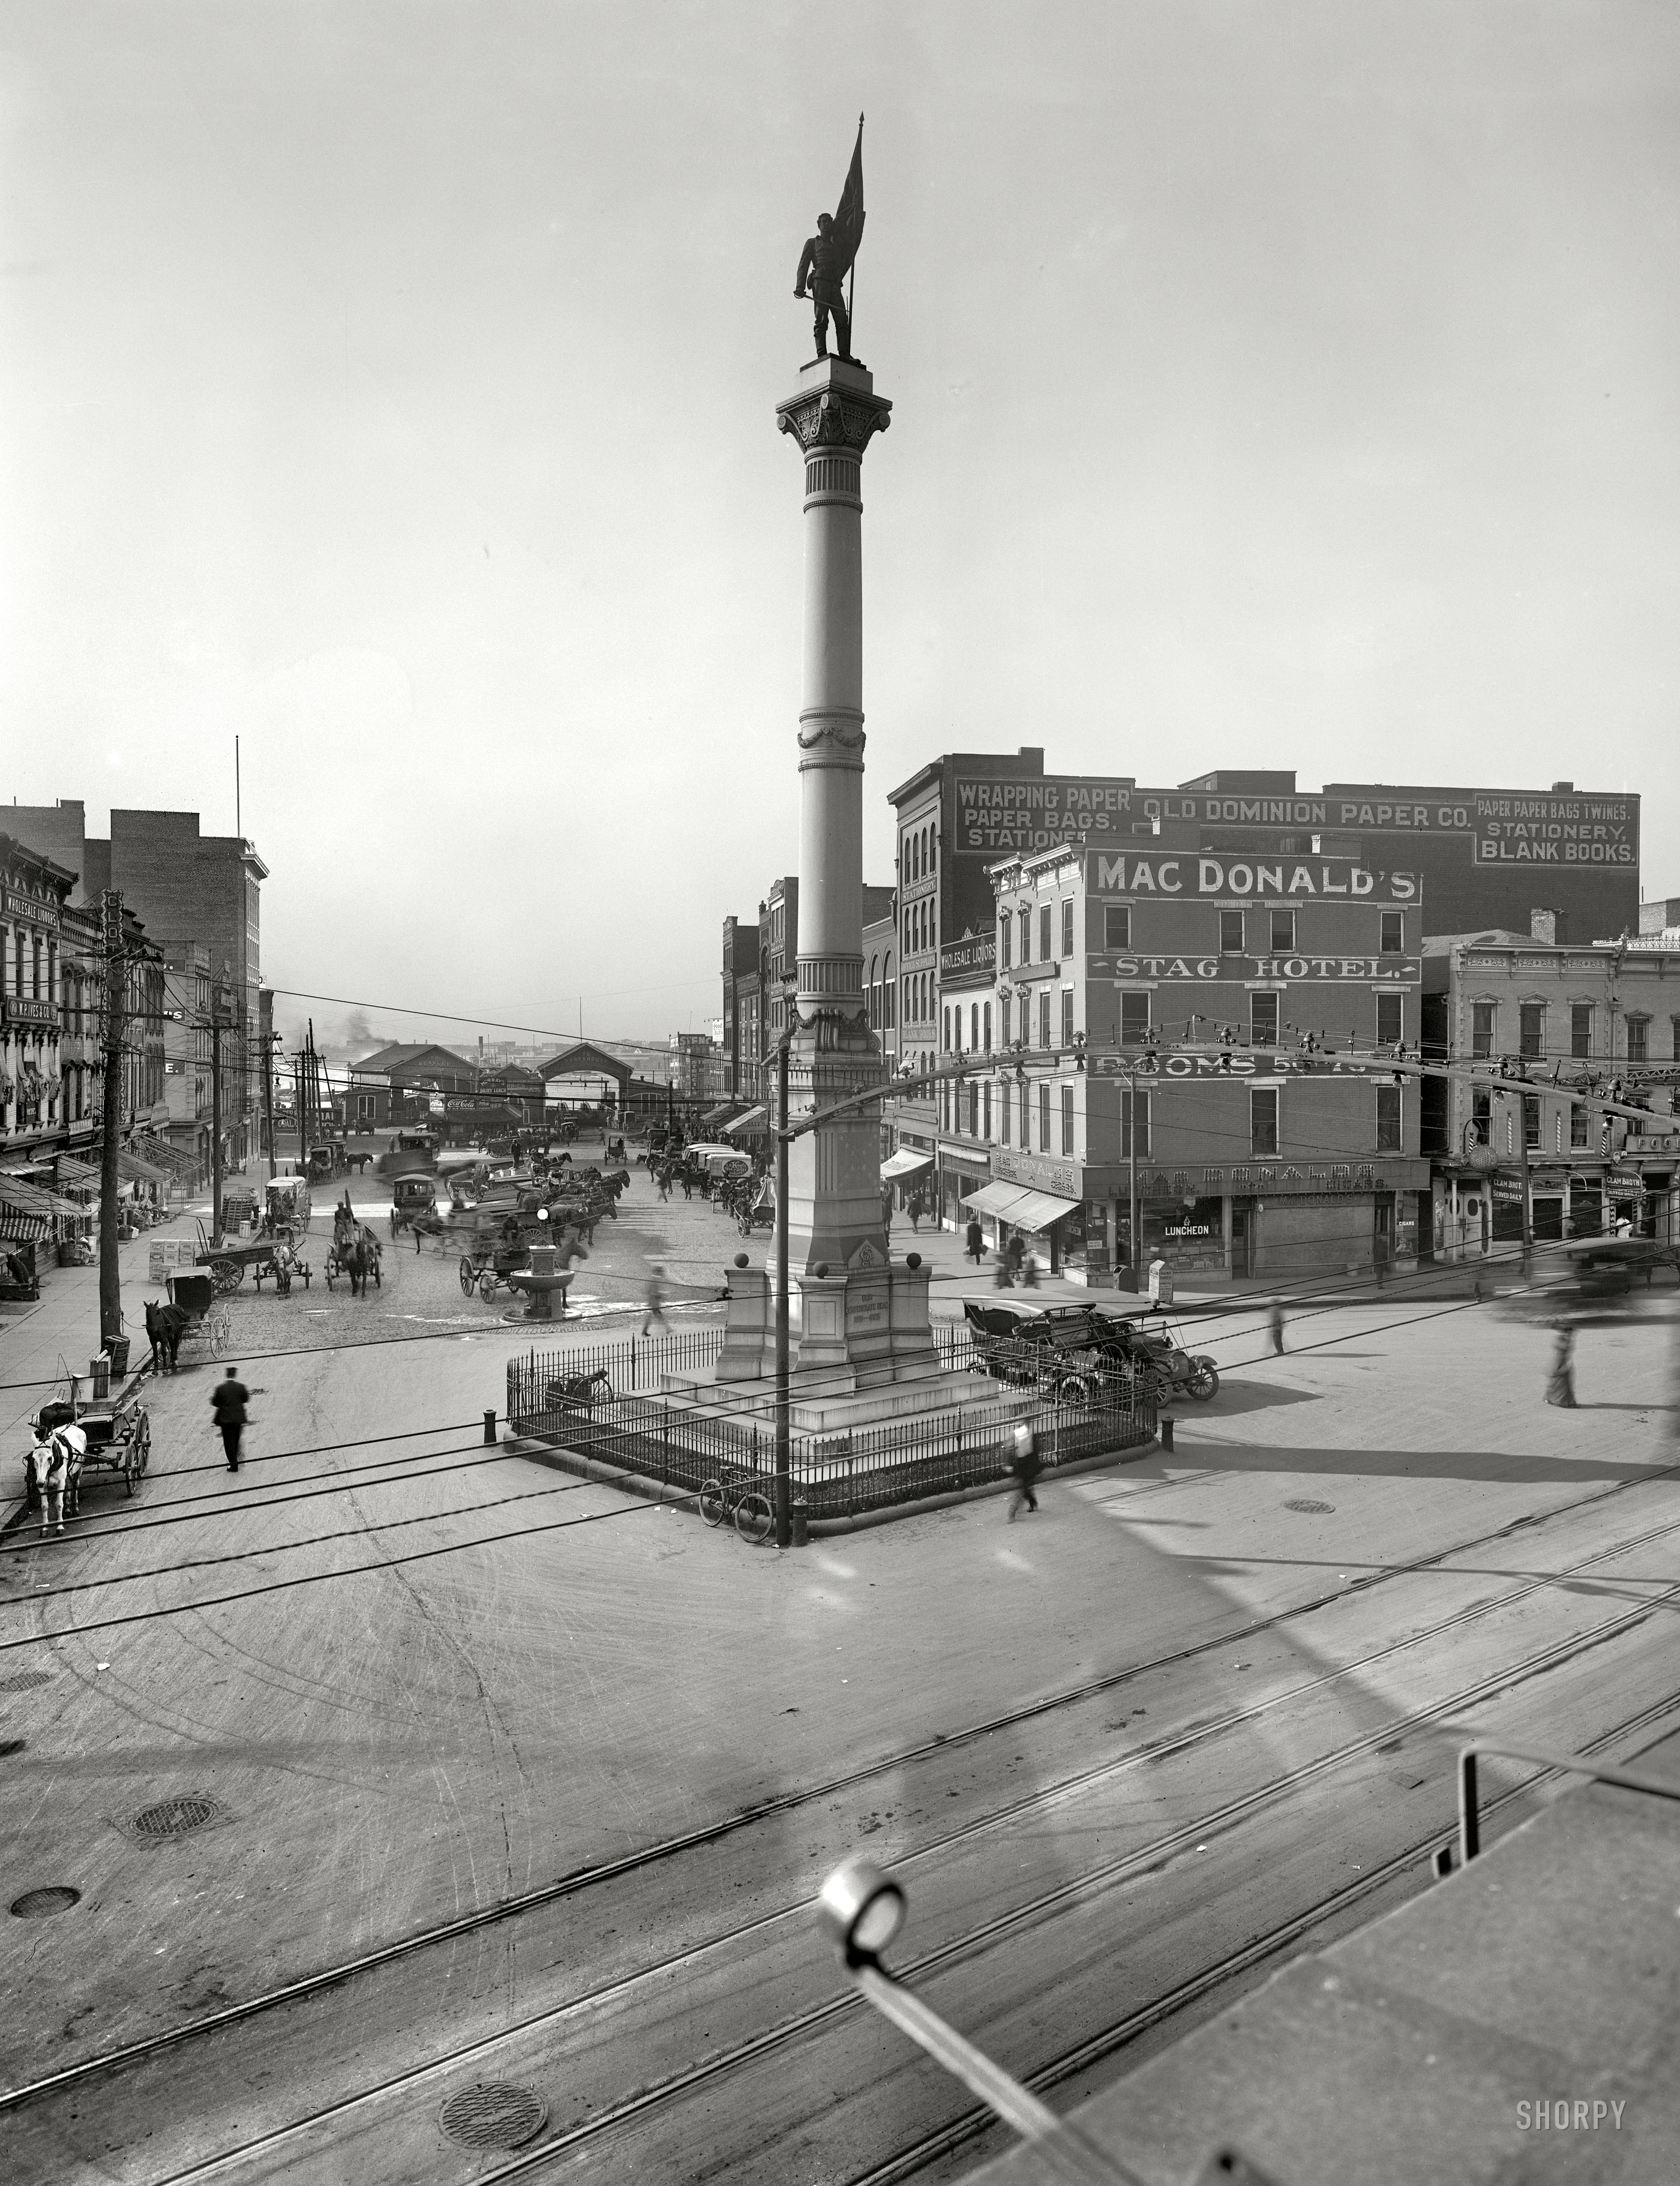 Norfolk, Virginia, circa 1910. "Confederate Monument." Our third look at Norfolk this week reveals another MacDonald's Luncheon & Cigar, as well the Stag Hotel and terminals for the Portsmouth and Berkley ferries. And: Clam Broth Served Daily. Whew! 8x10 inch glass negative, Detroit Publishing Co. View full size.